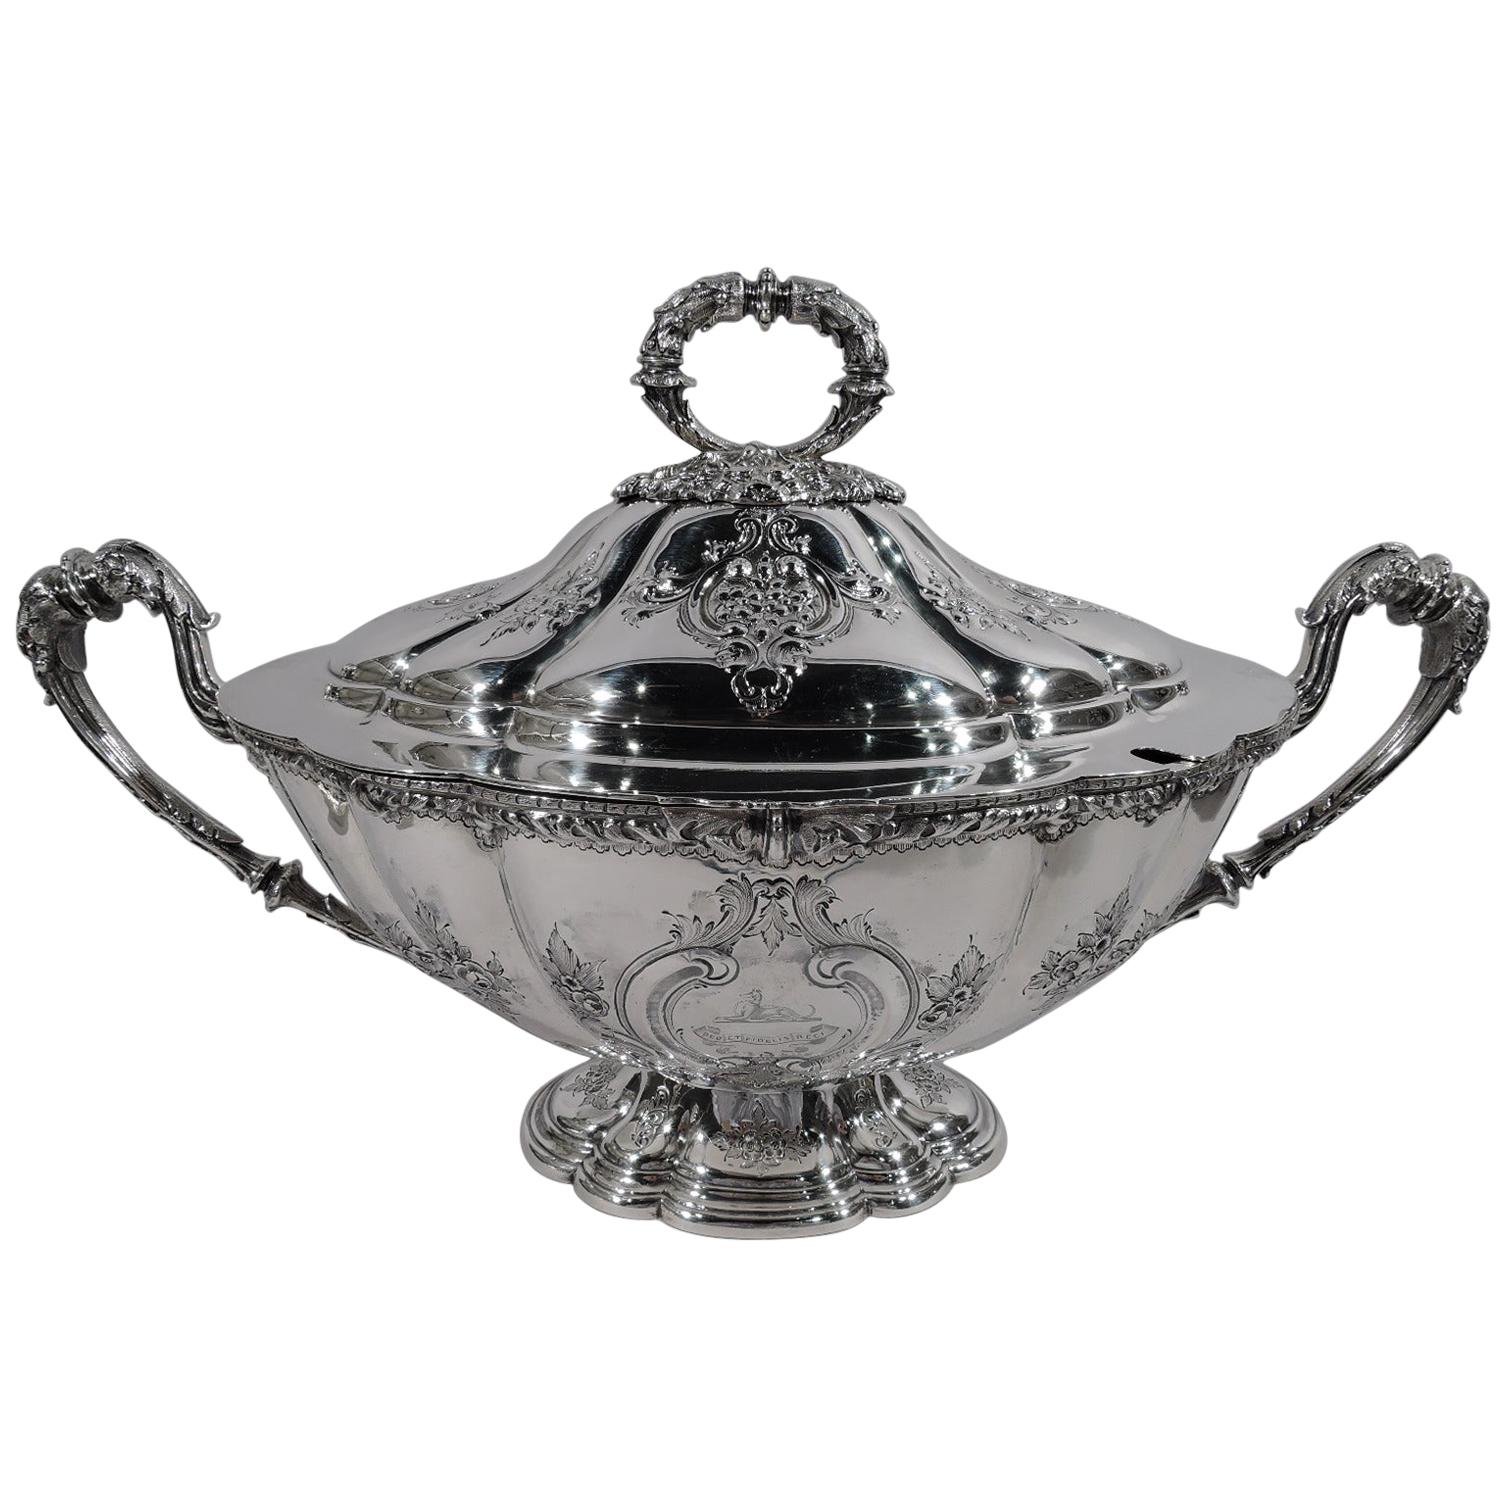 Antique English Edwardian Sterling Silver Soup Tureen